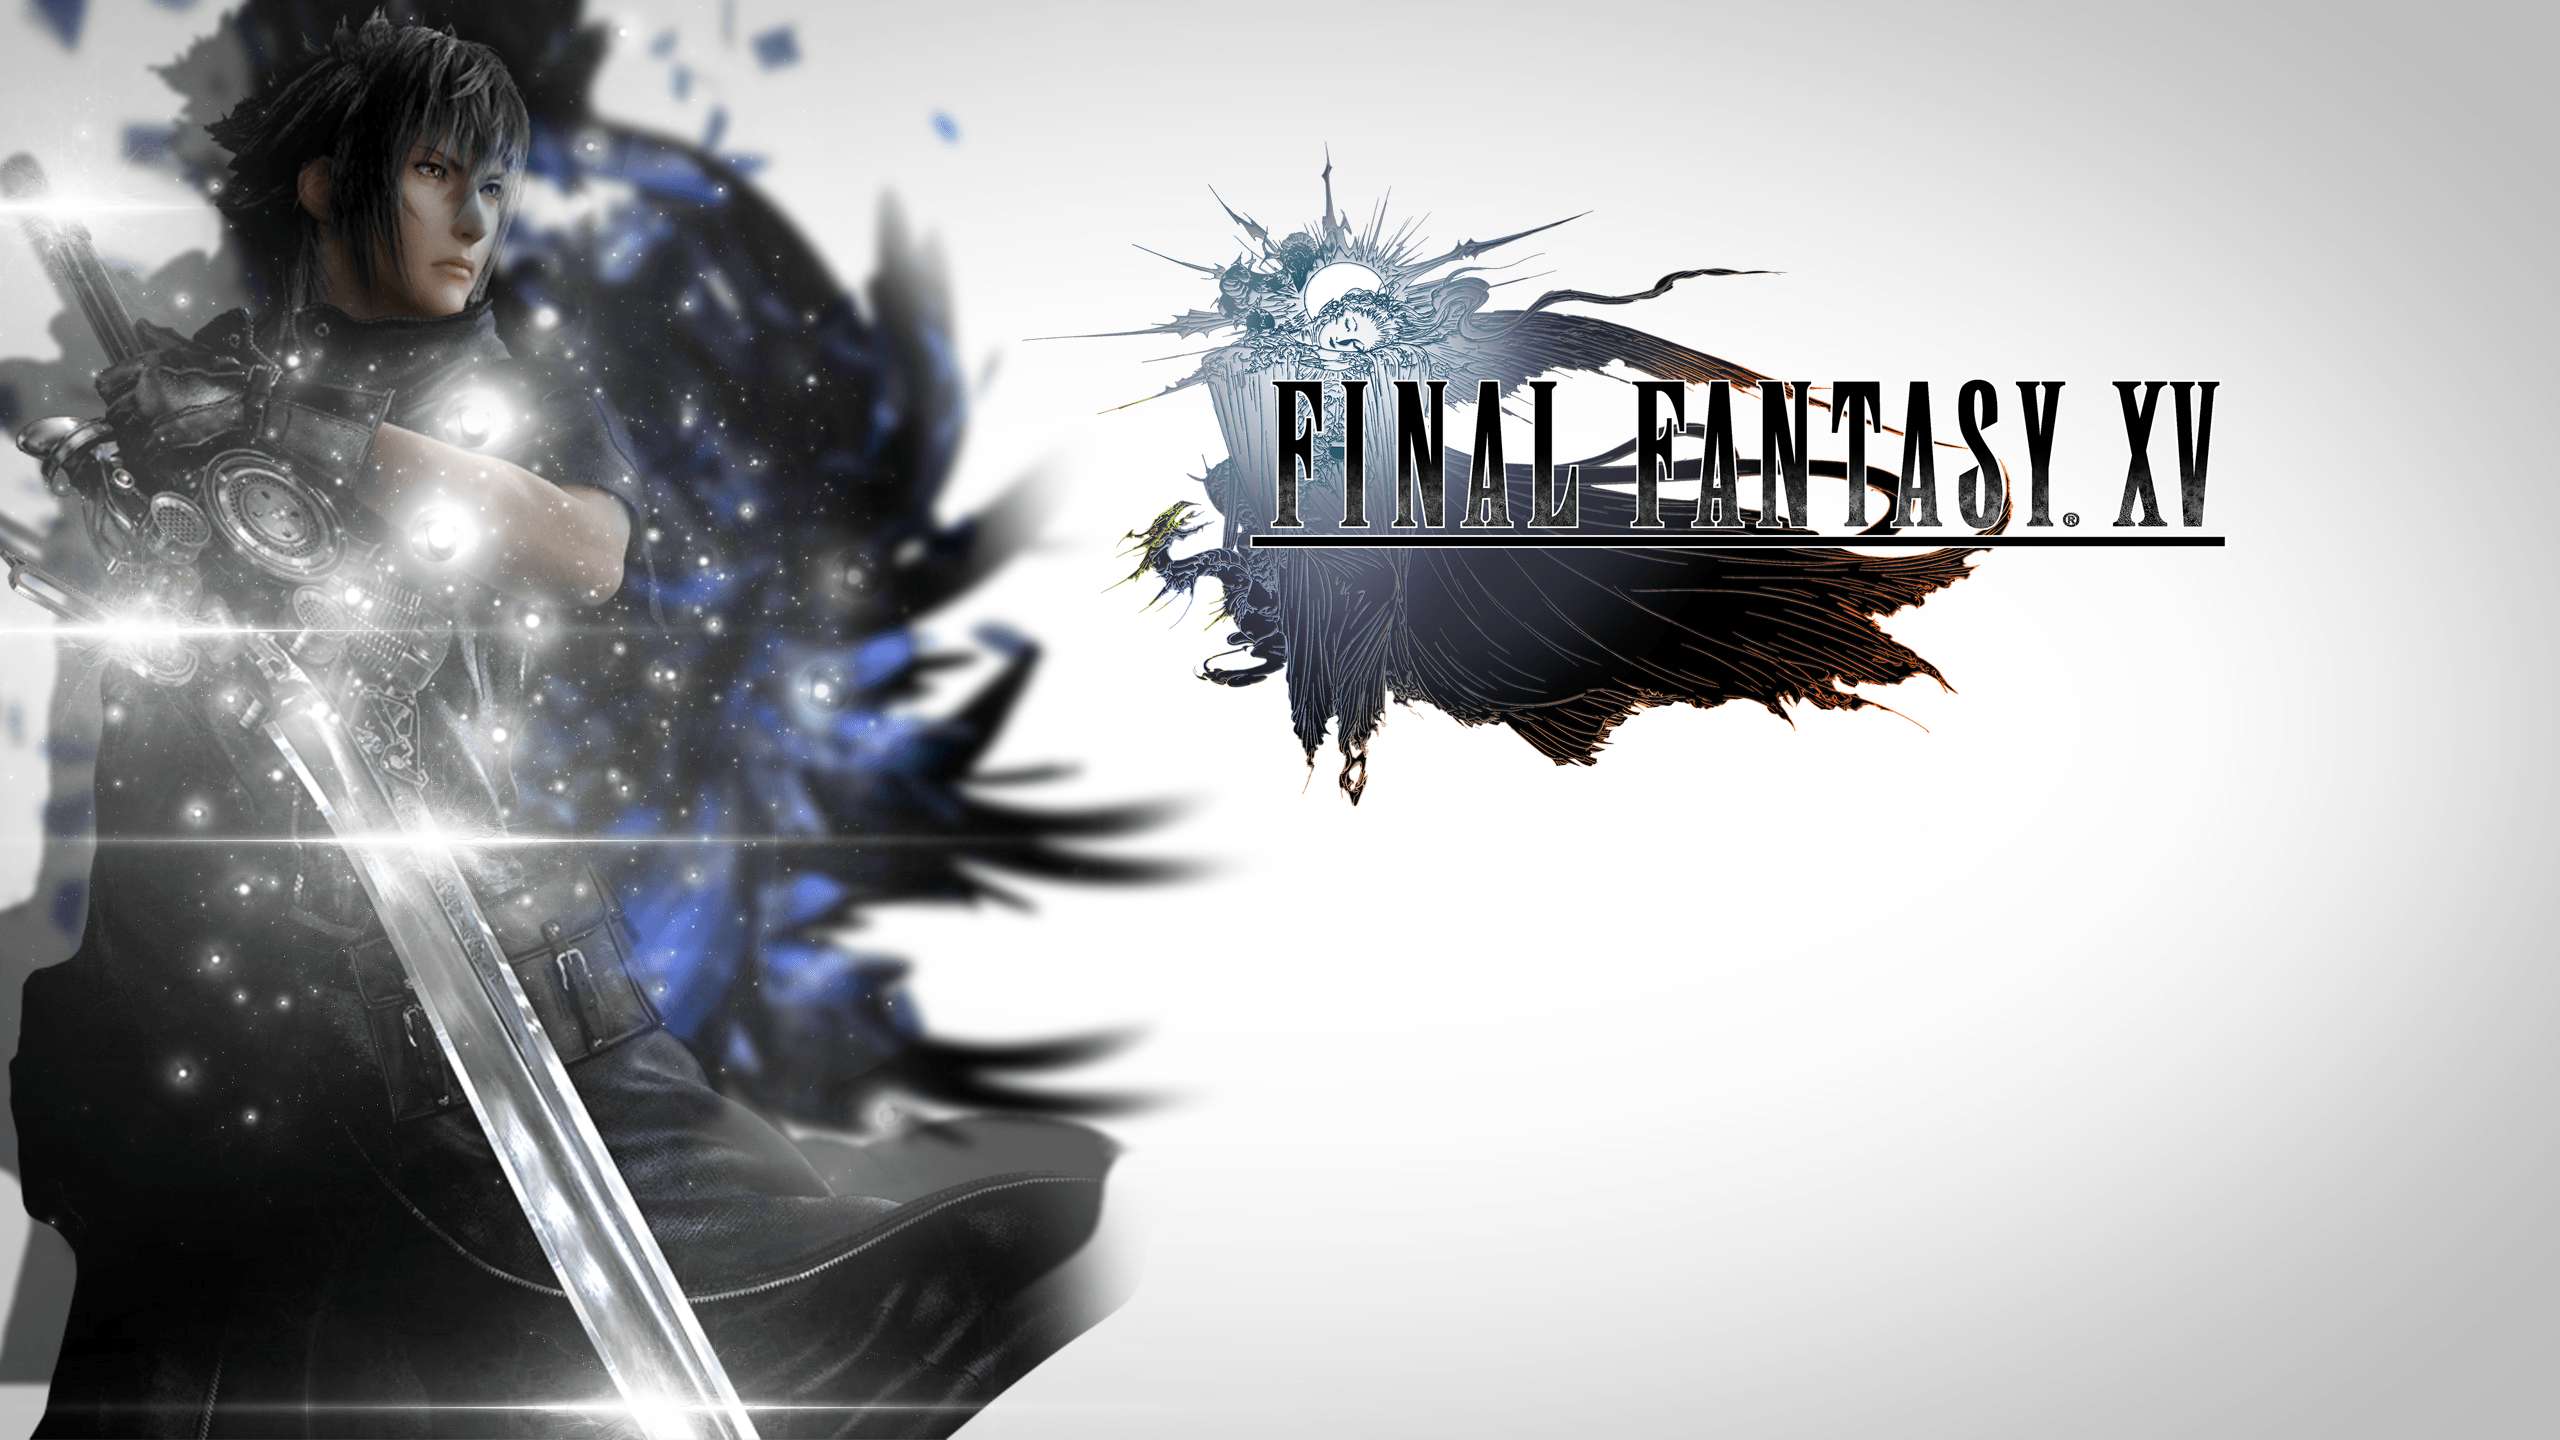 Final Fantasy XV Wallpaper Image Photo Picture Background